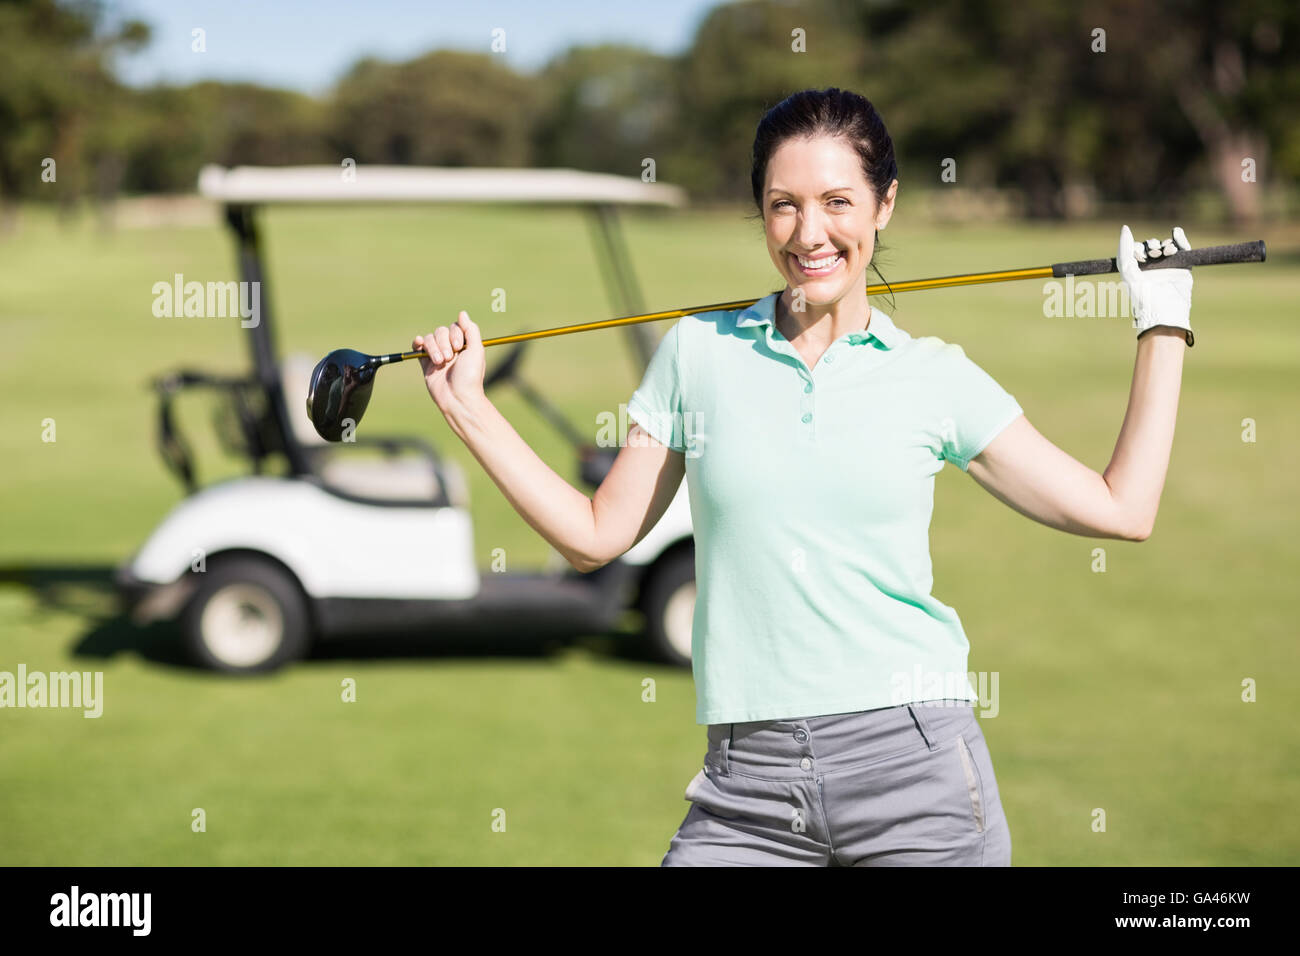 Portrait of smiling woman carrying golf club Banque D'Images